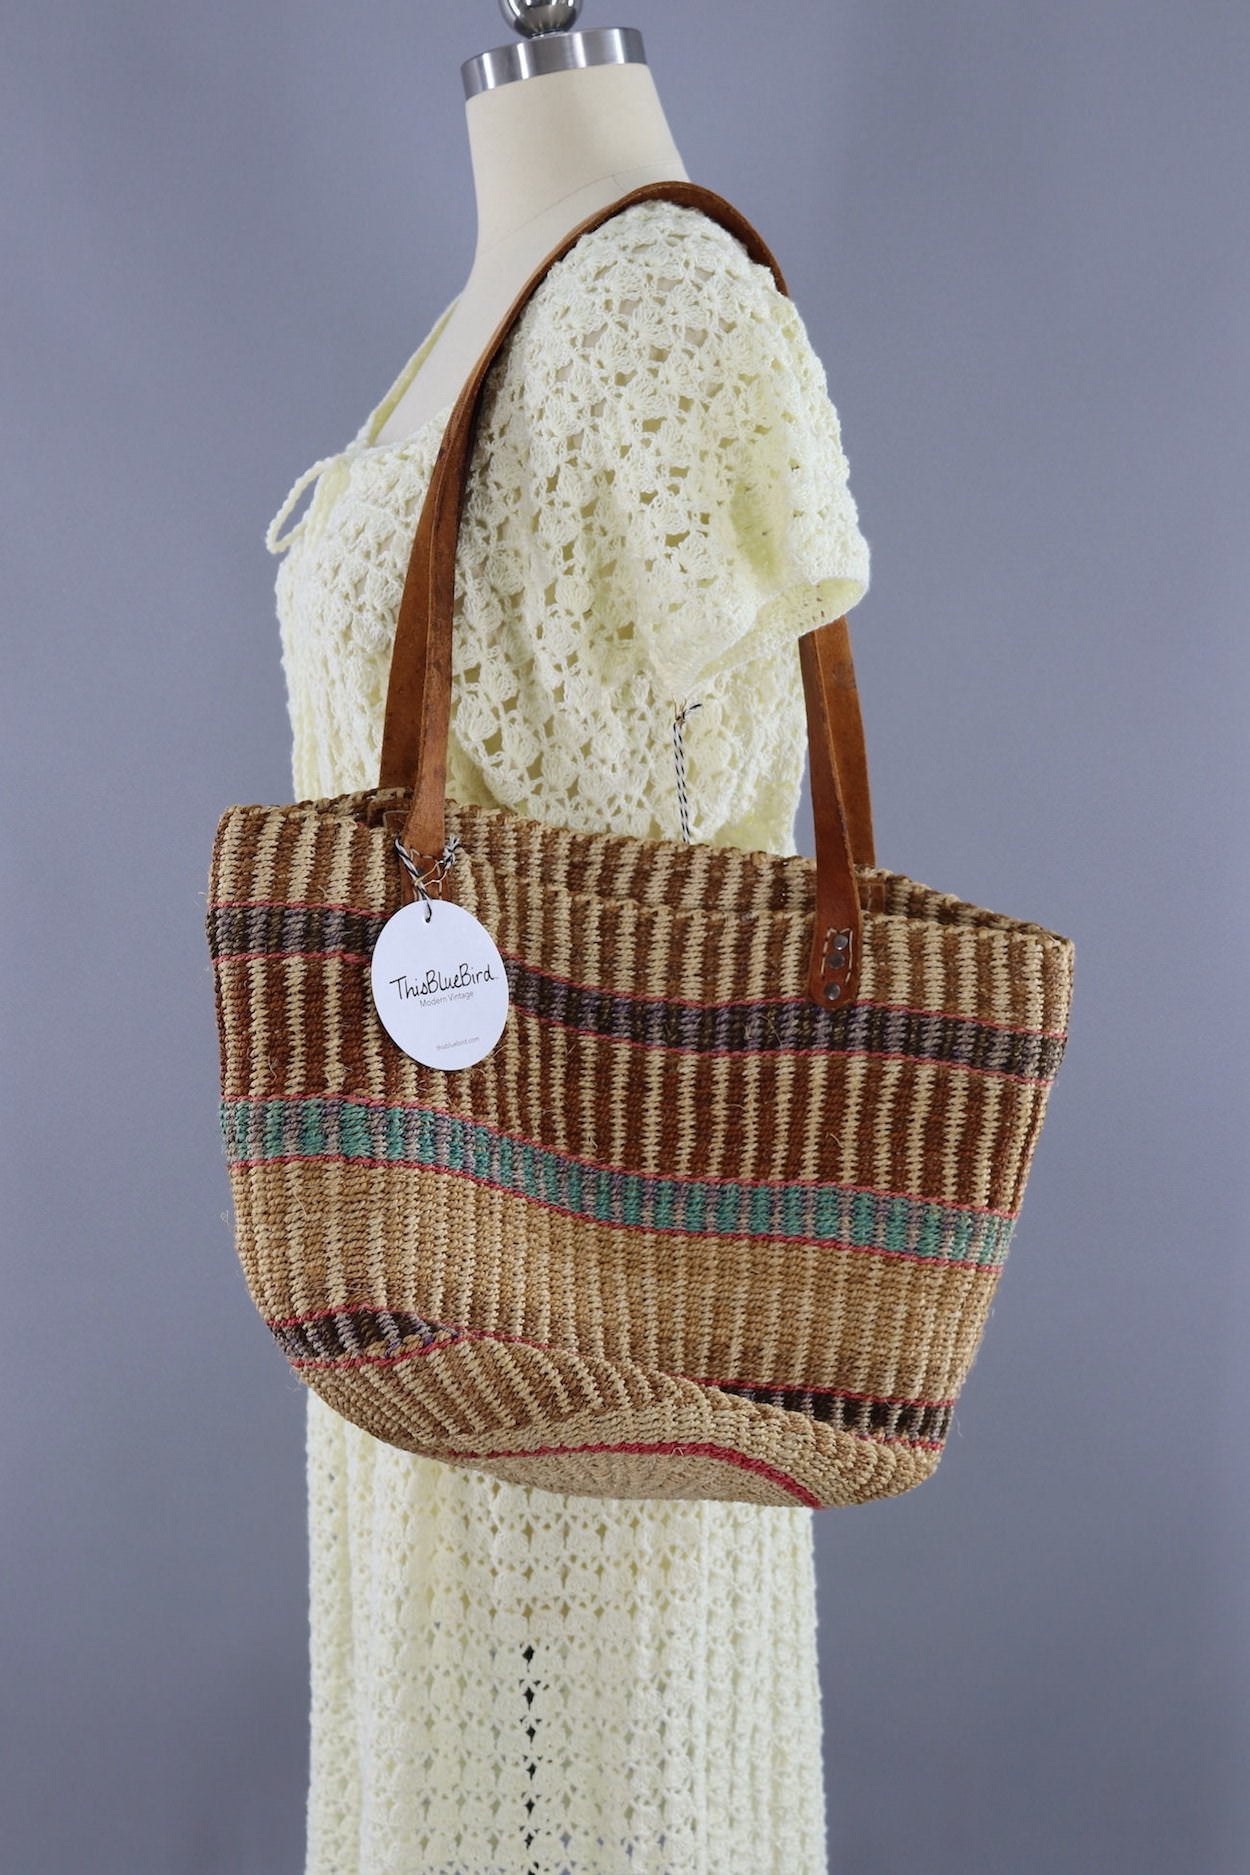 Vintage Straw Market Tote with Leather Handles / Tan Pink Aqua Stripes - ThisBlueBird